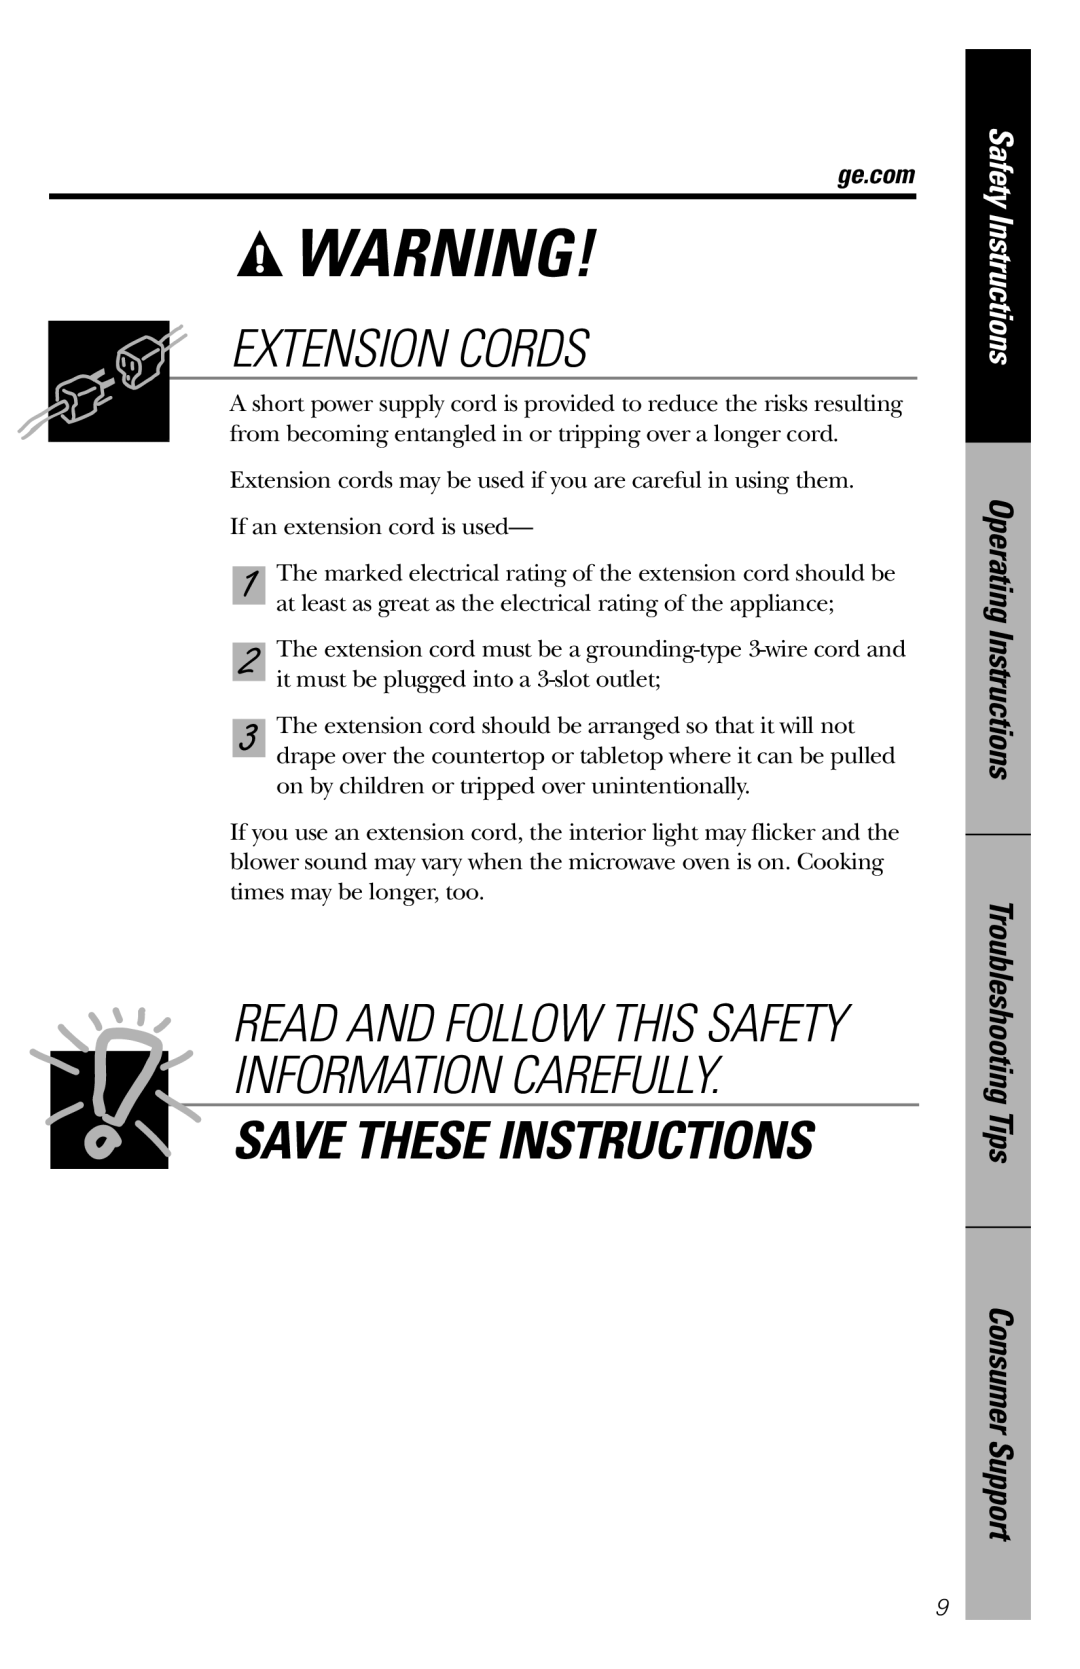 GE PEM31 Extension Cords, Save These Instructions, Read And Follow This Safety Information Carefully, Safety Instructions 